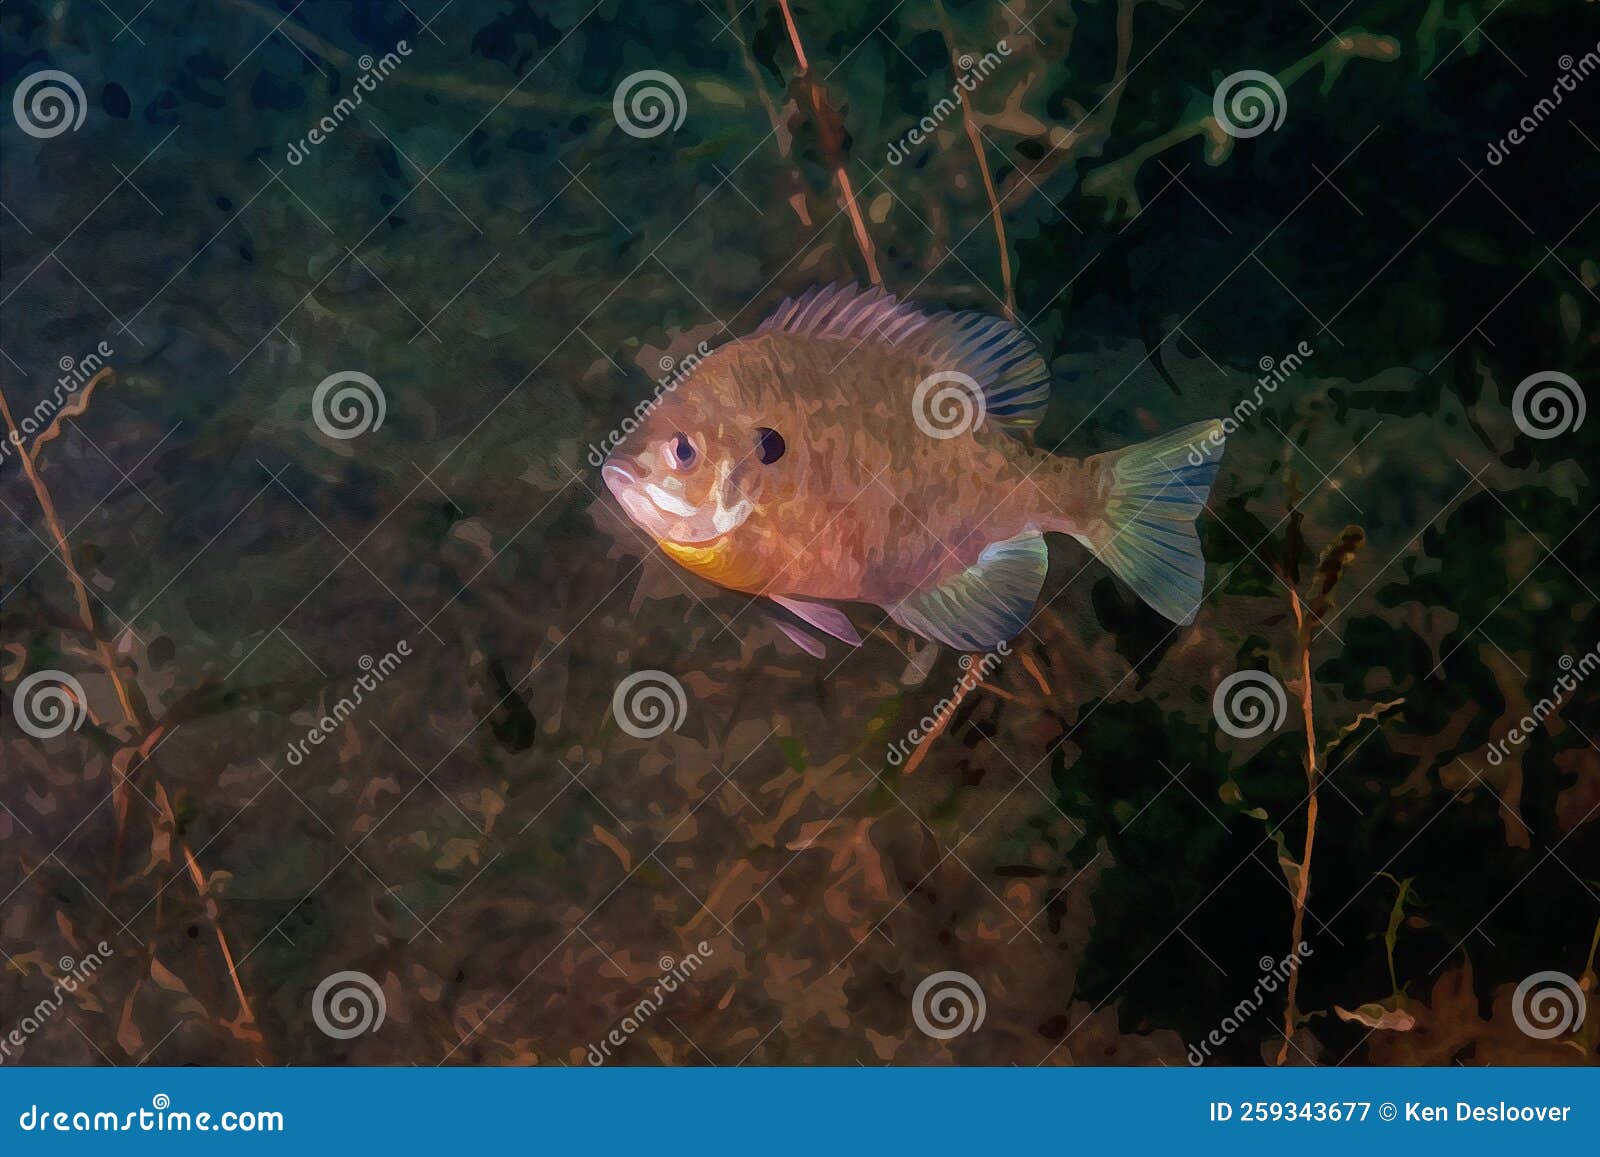 Digitally Created Watercolor Painting of a Male Bluegill Dollar Sunfish in  a Natural Habitat Surrounding Stock Image - Image of technique, life:  259343677